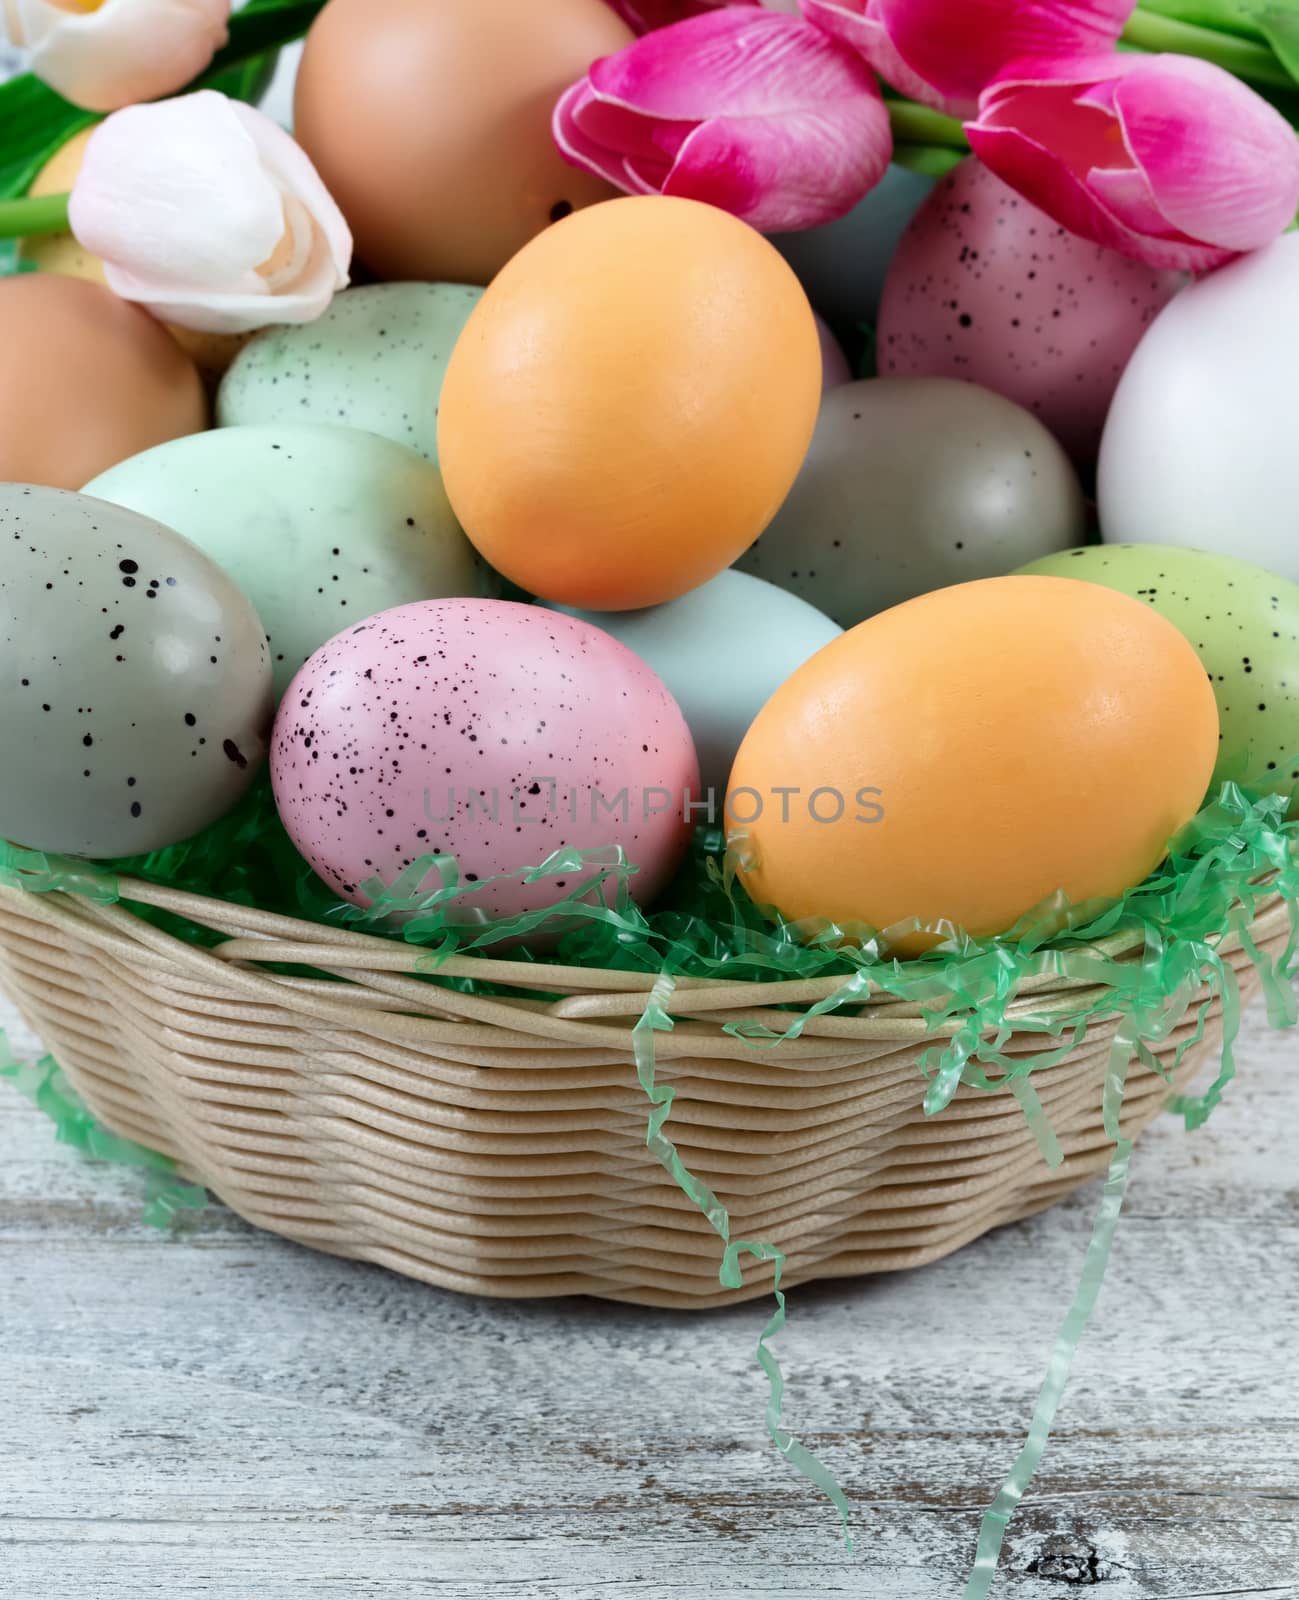 Basket filled with colorful eggs and tulips in background on rustic white wood for Easter concept 